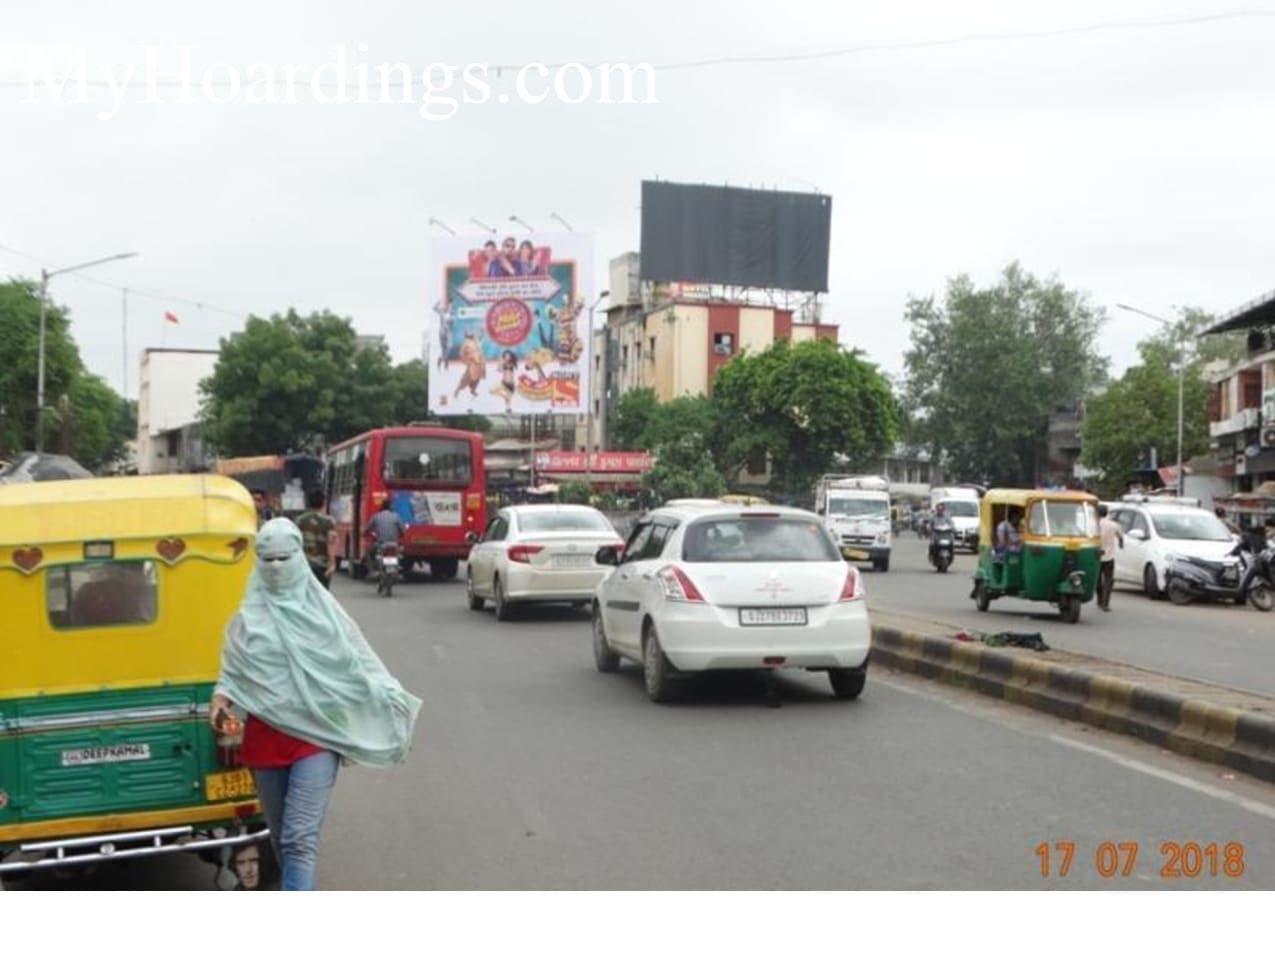 Billboard at 10 Acr Mall lake in Ahmedabad, Best Outdoor Hoardings Advertising Company Ahmedabad